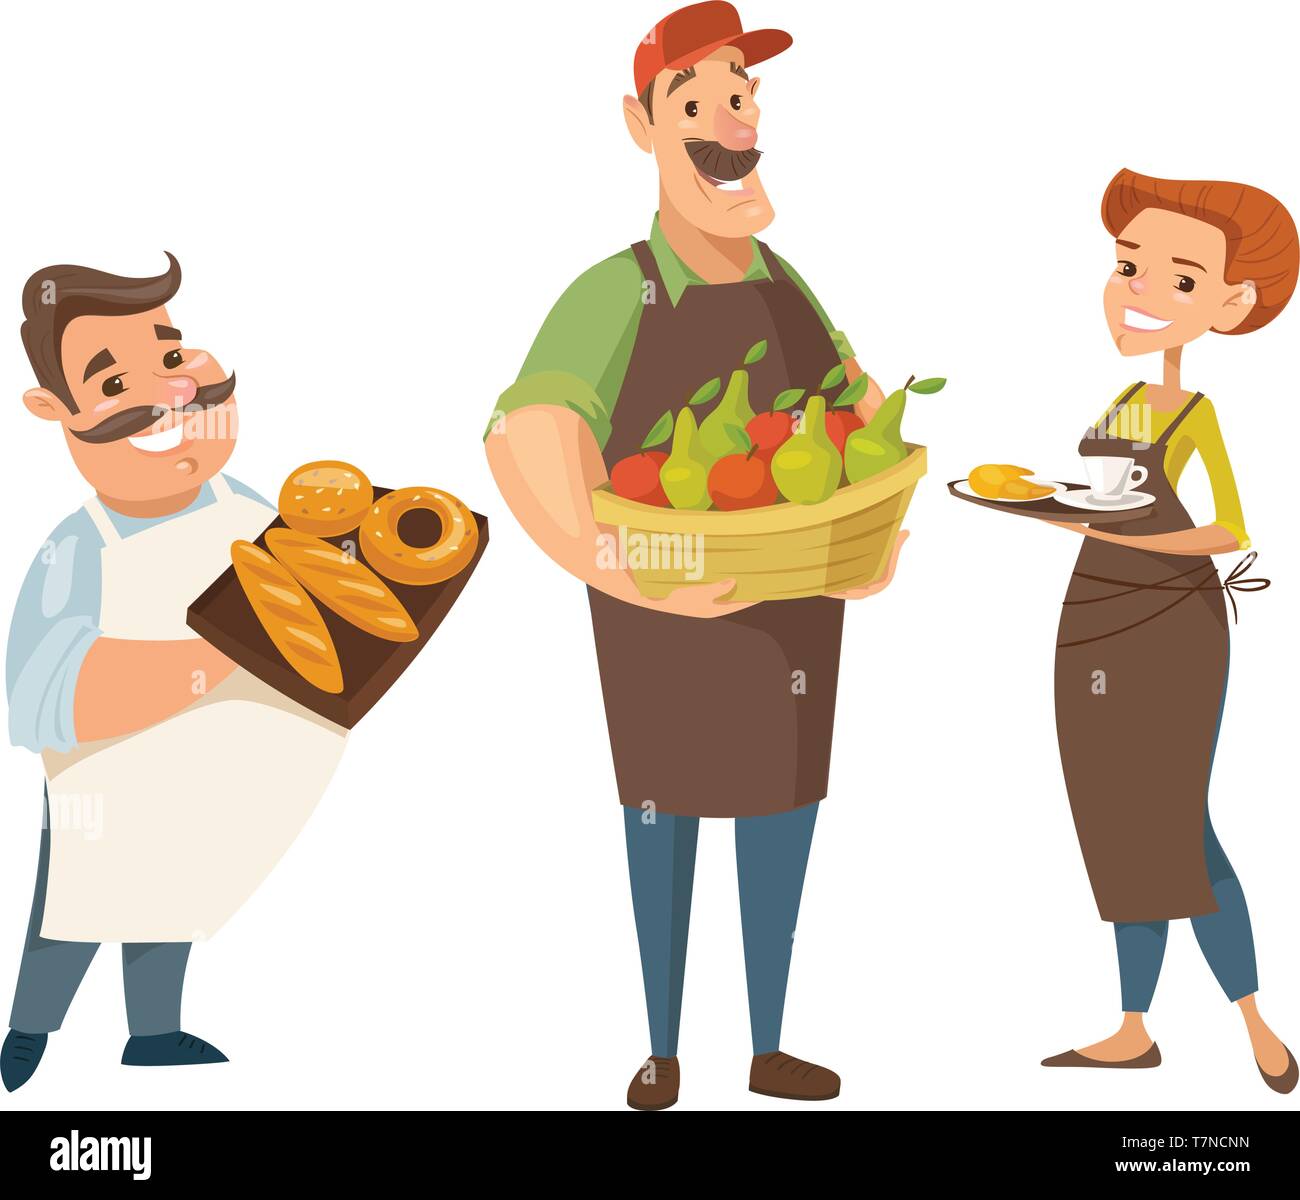 Vector profession characters designs. Baker, farmer and coffee waiter Stock Vector